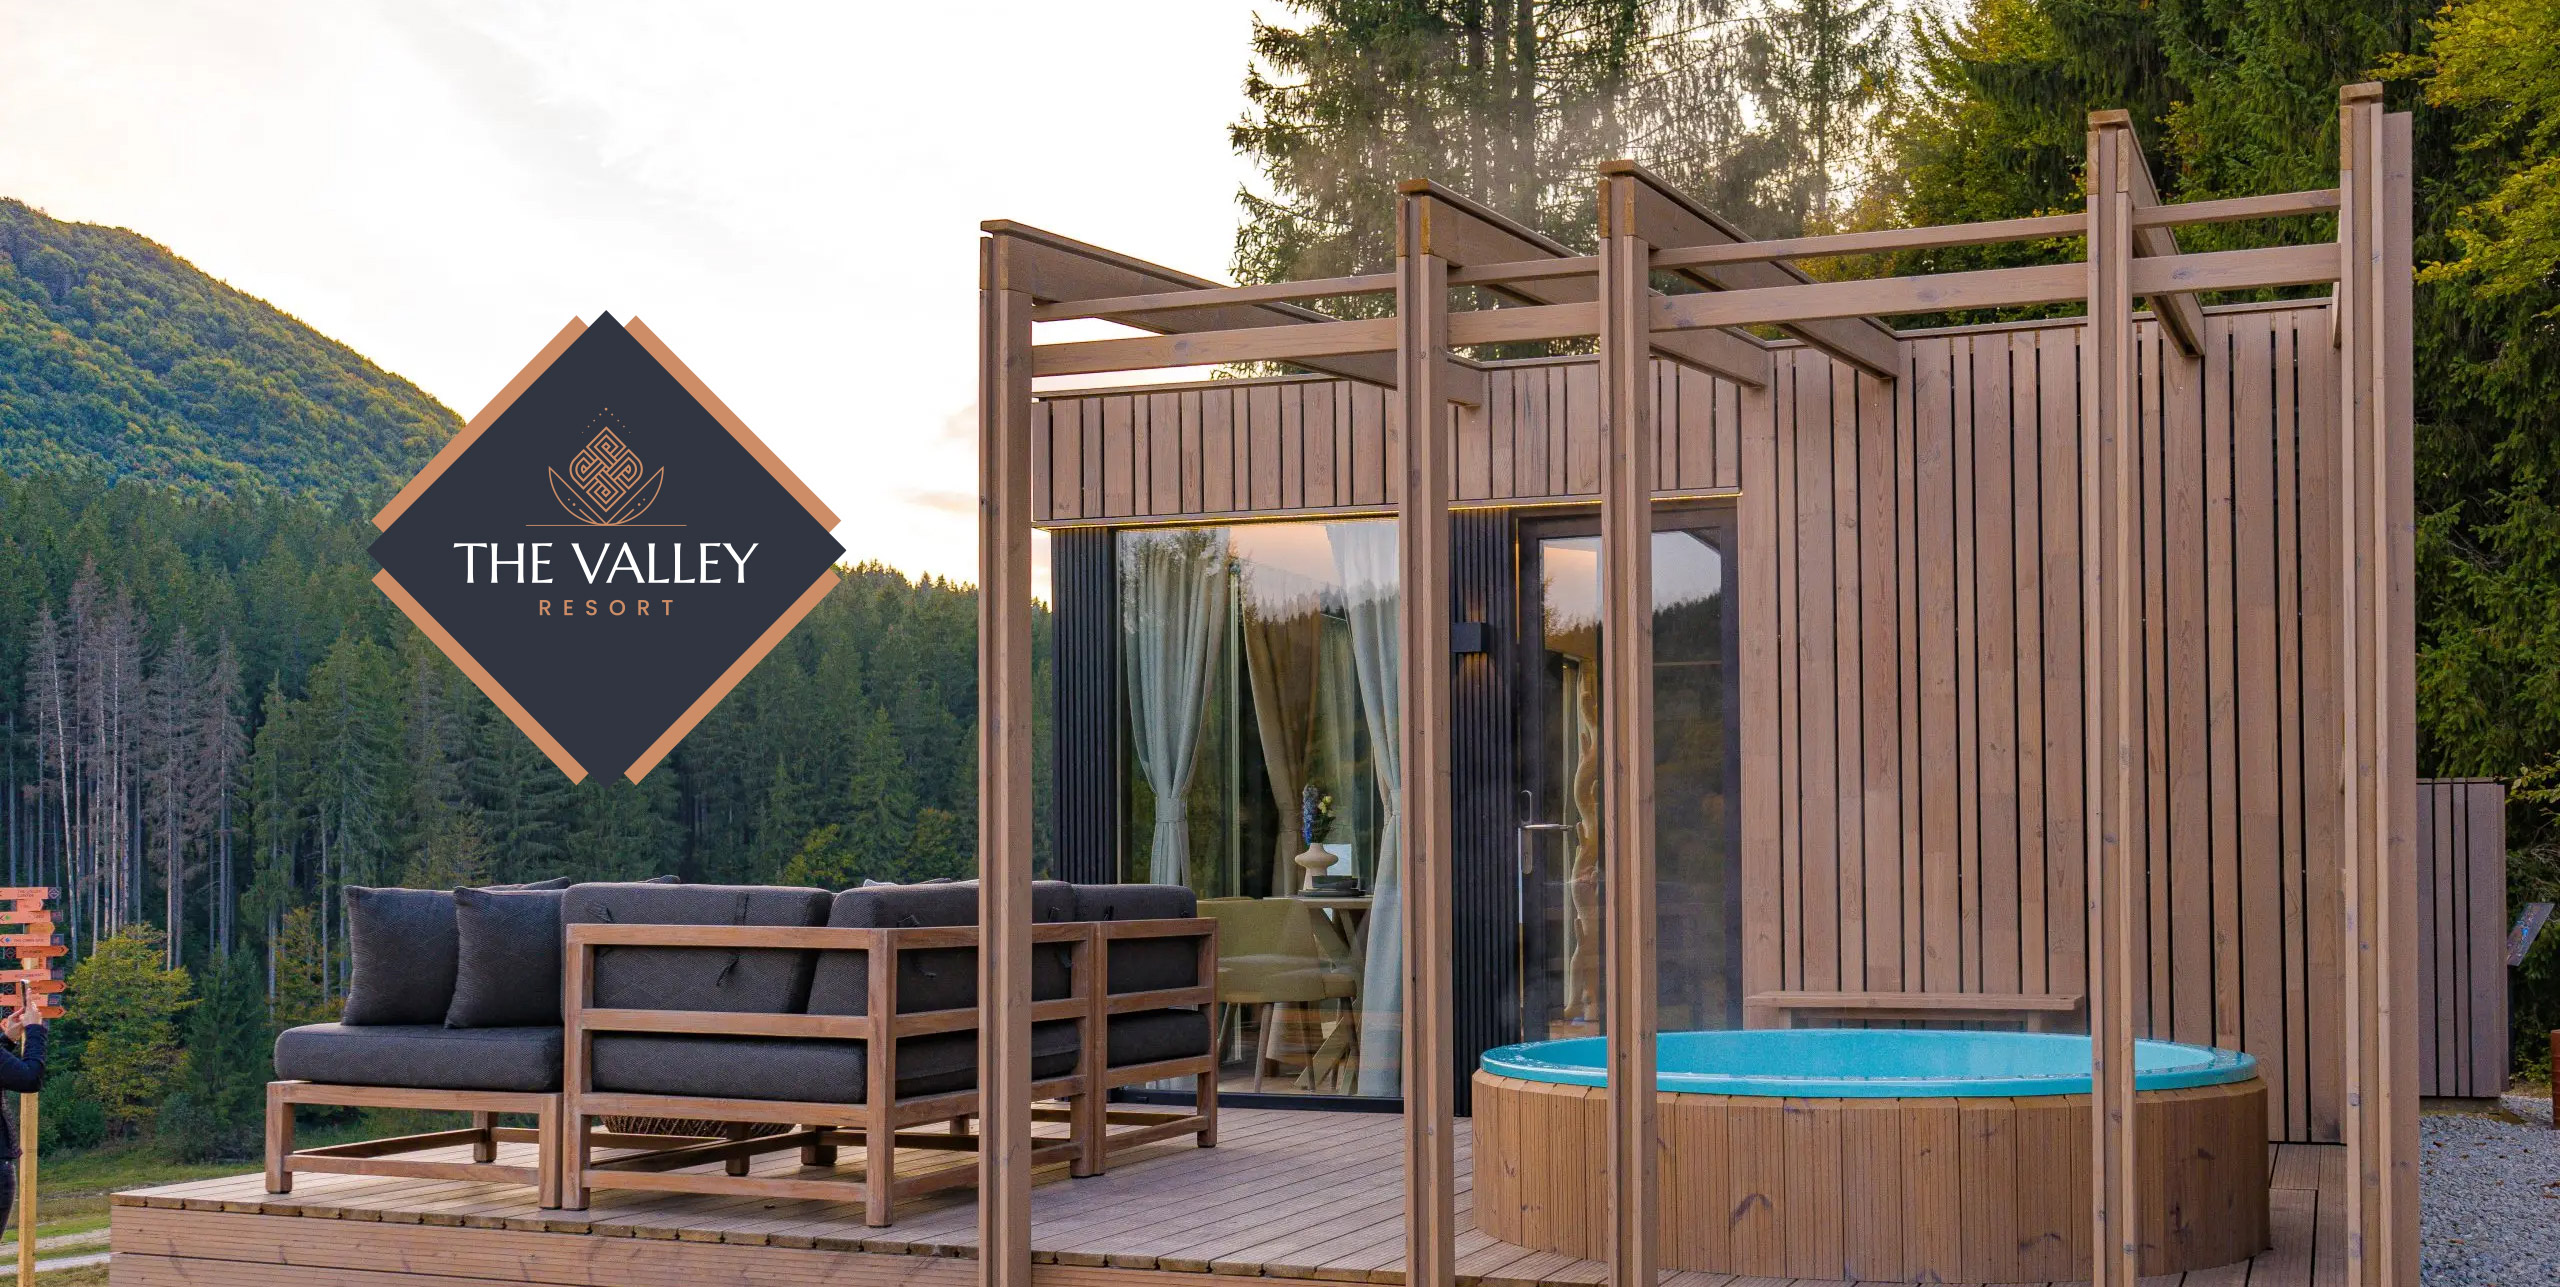 The Valley Resort: Armeanu Creative Studio’s Vision for Sustainable Hospitality